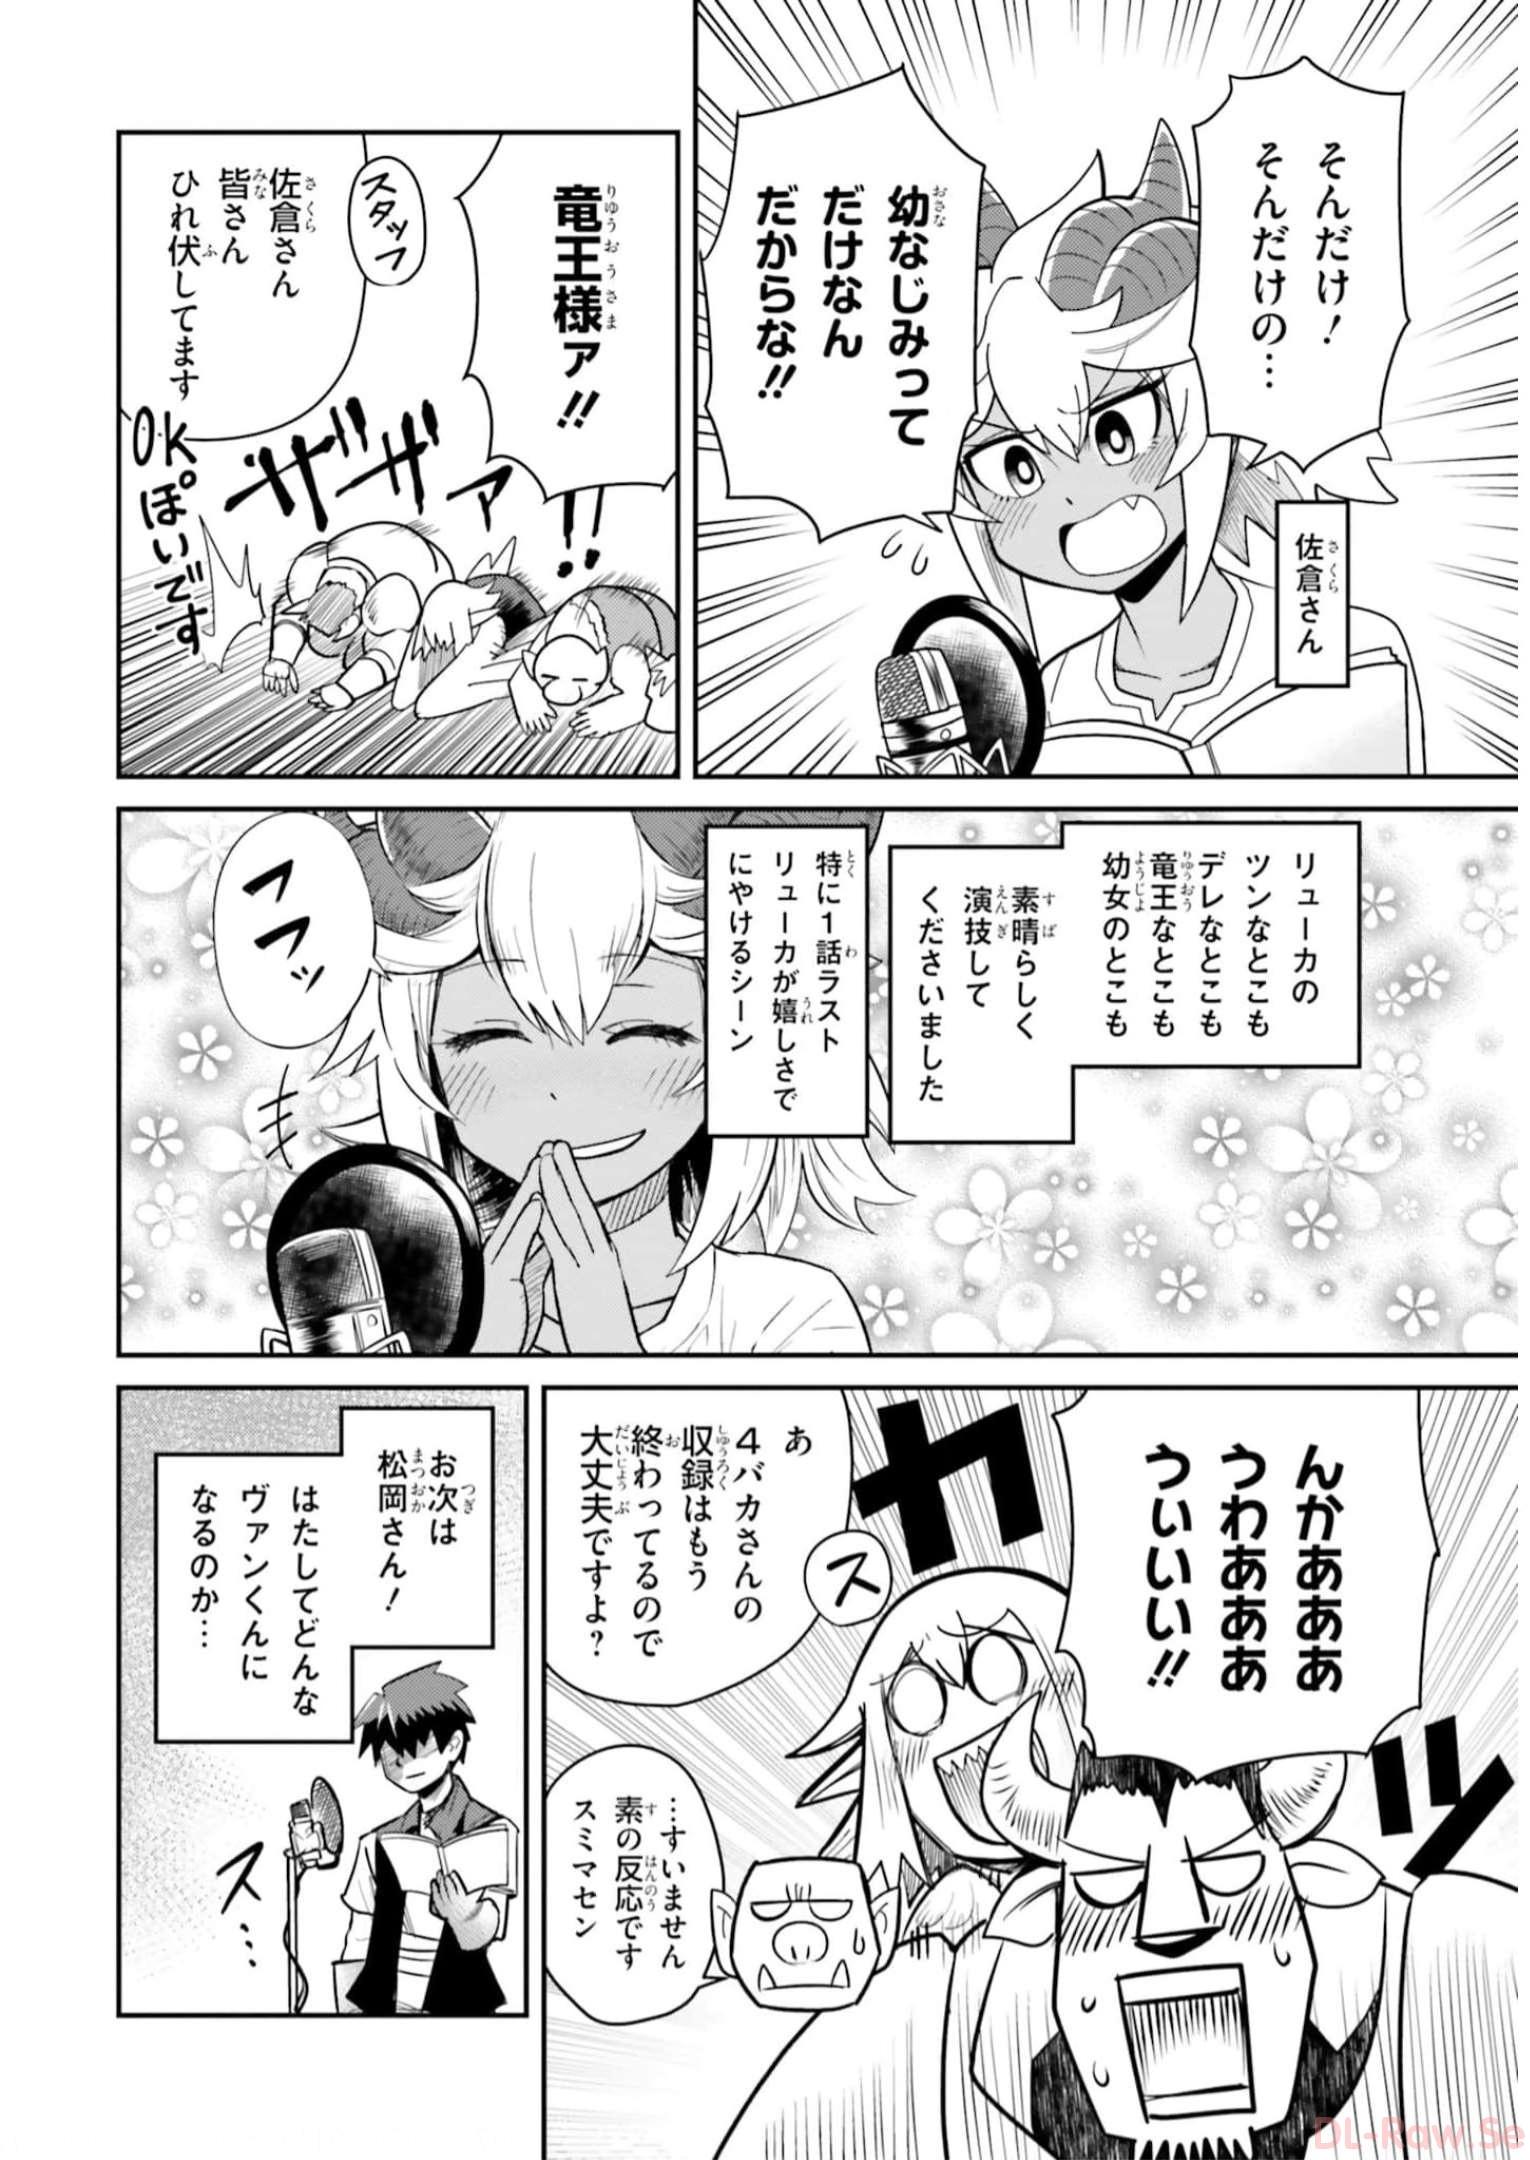 Dungeon Friends Forever Dungeon's Childhood Friend ダンジョンの幼なじみ 第18.2話 - Page 2